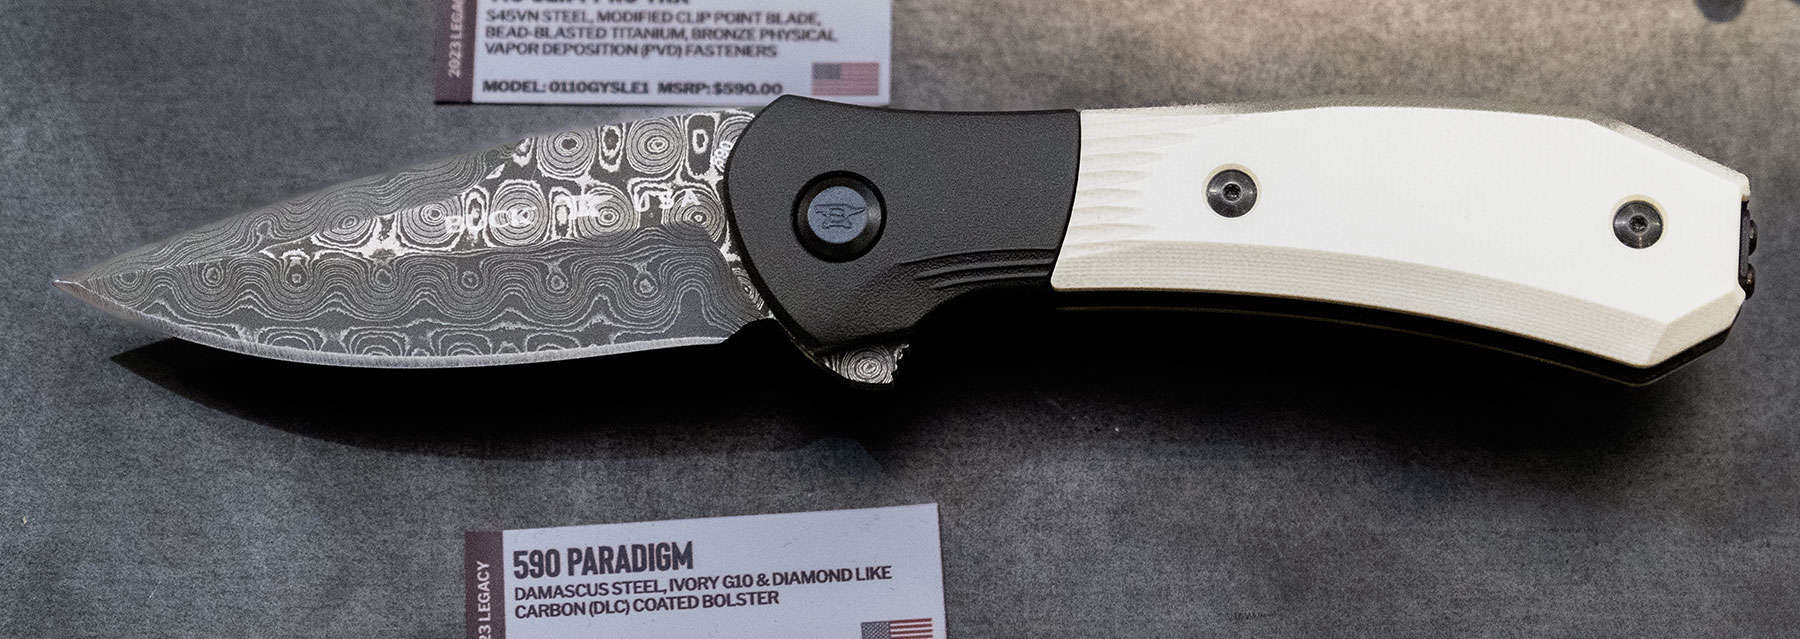 The Buck Paradigm in raindrop Damascus and ivory G10 scales.